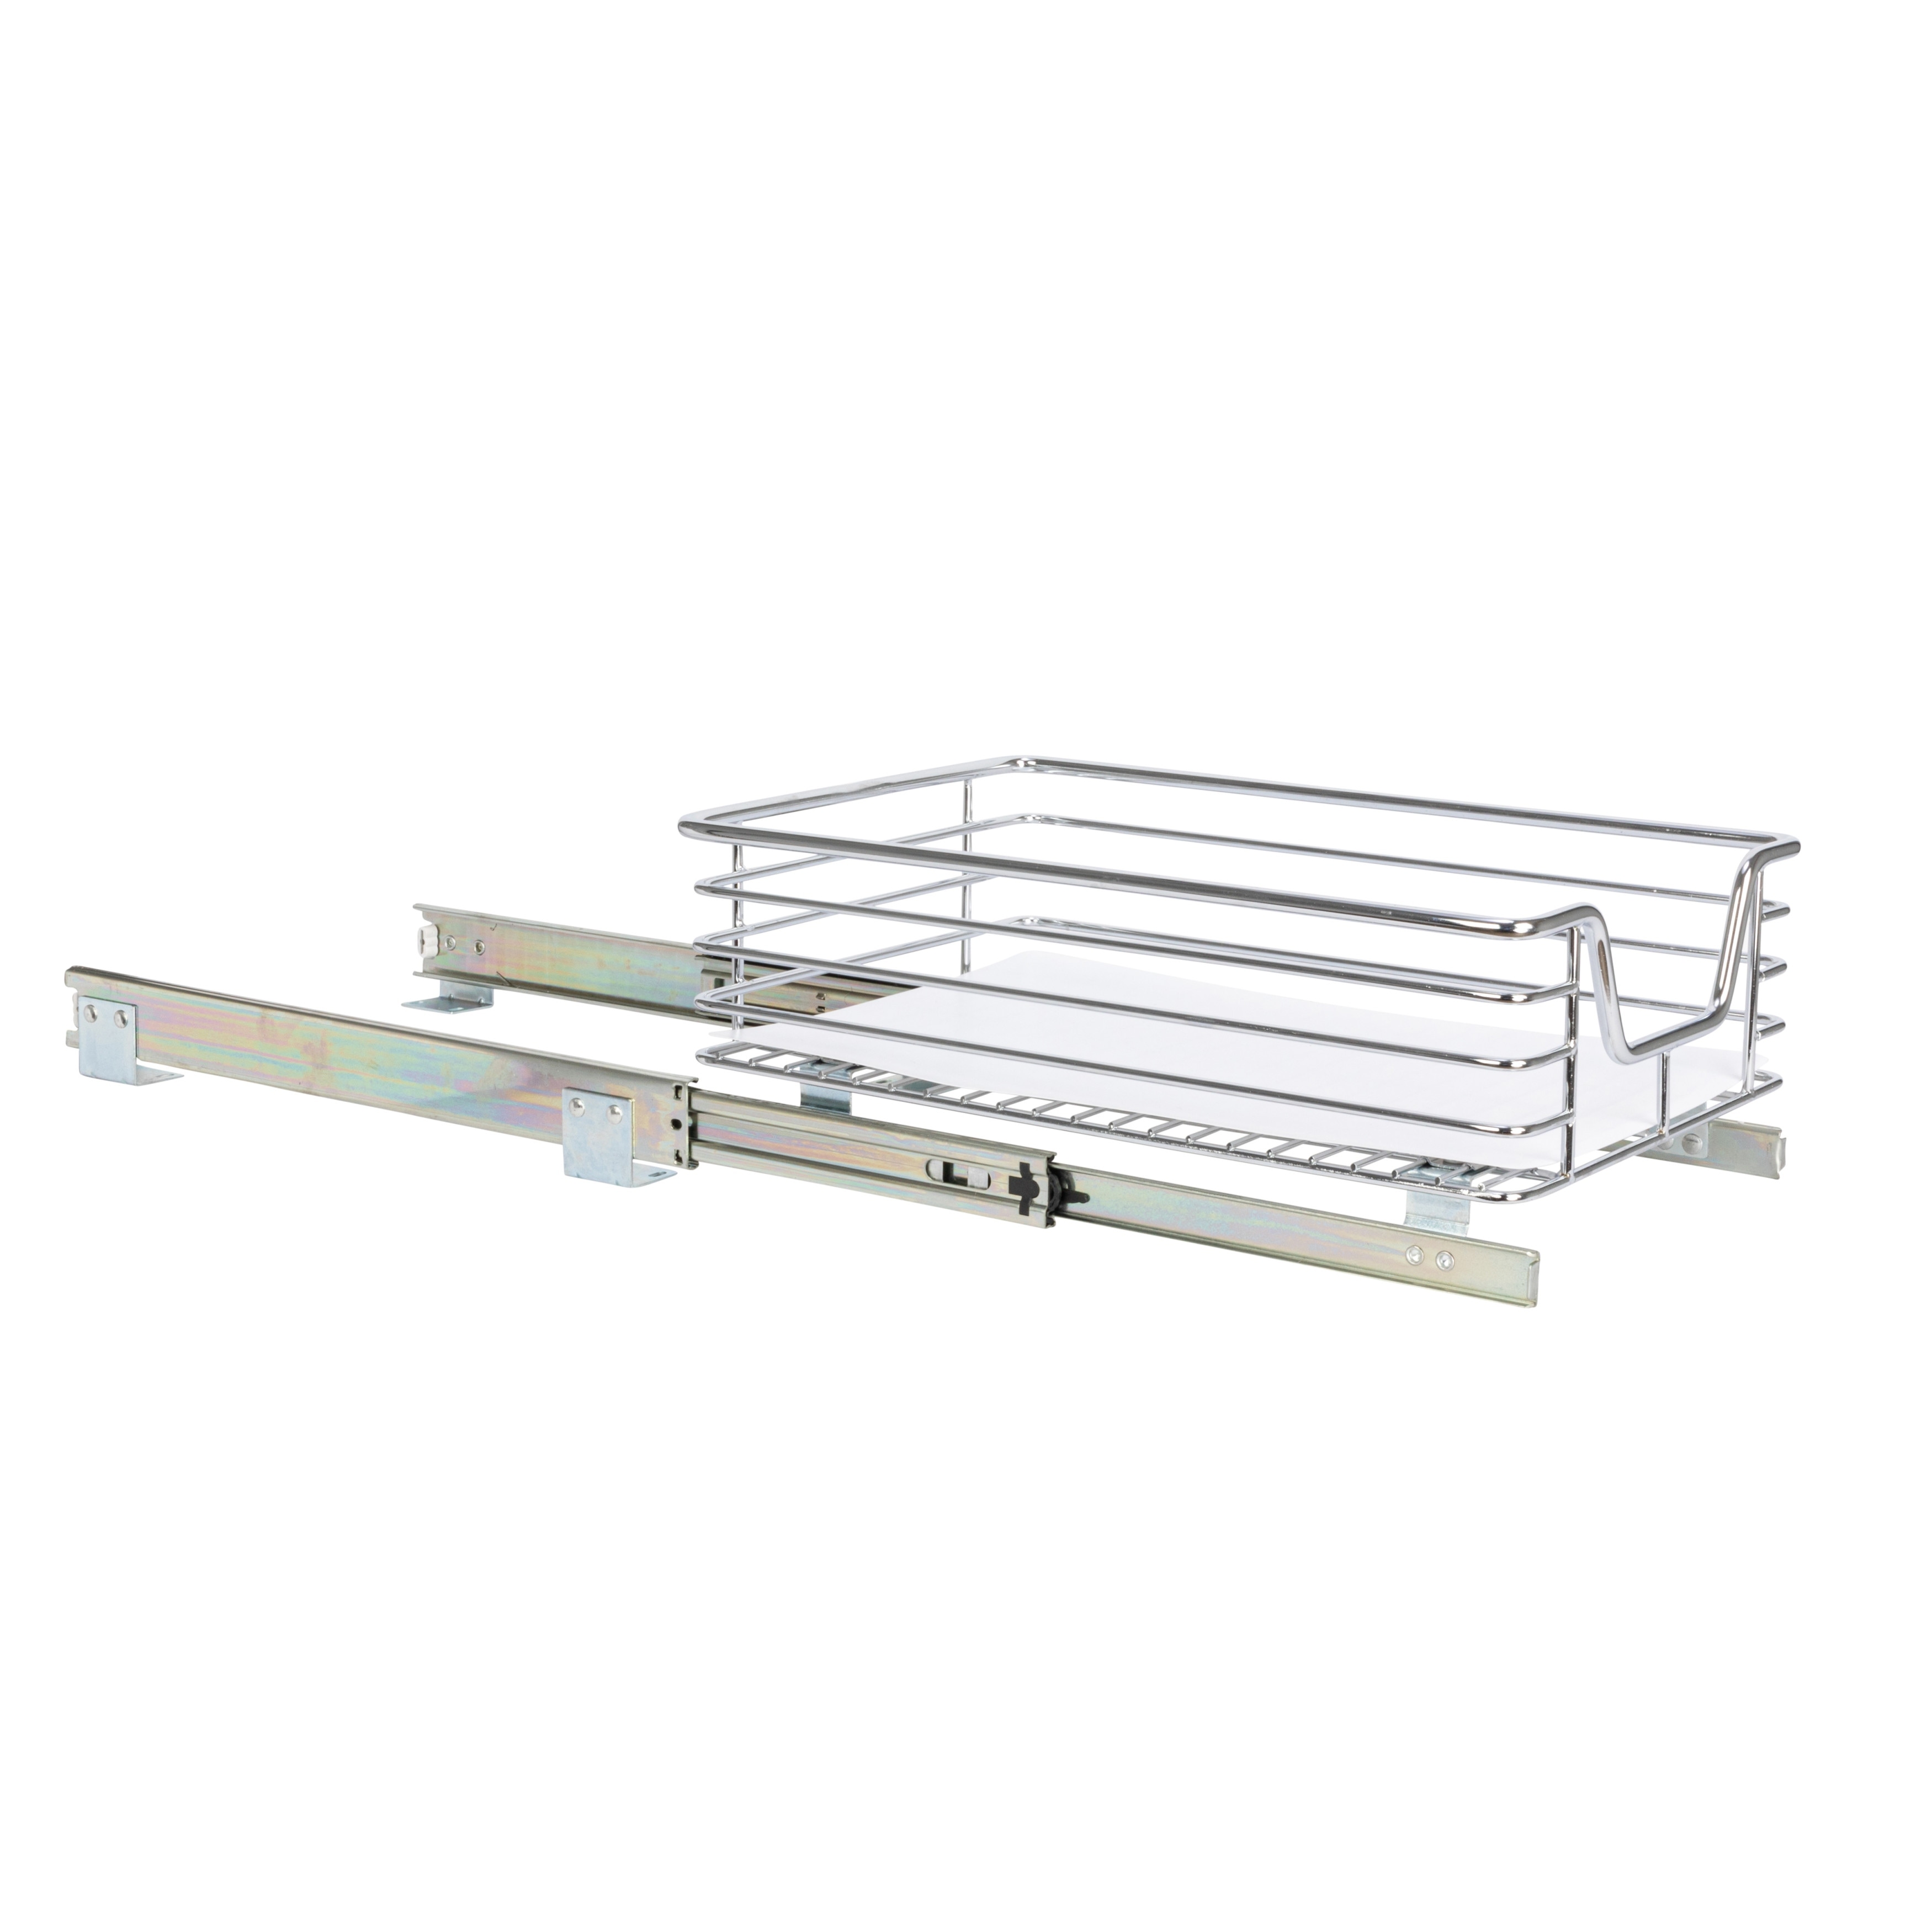 https://ak1.ostkcdn.com/images/products/is/images/direct/e9de98aeaa204b97ae12aa7817eaa6fe7a2d3724/Glidez-Multipurpose-1-Tier-Pull-Out-Slide-Out-Storage-Organizer.jpg